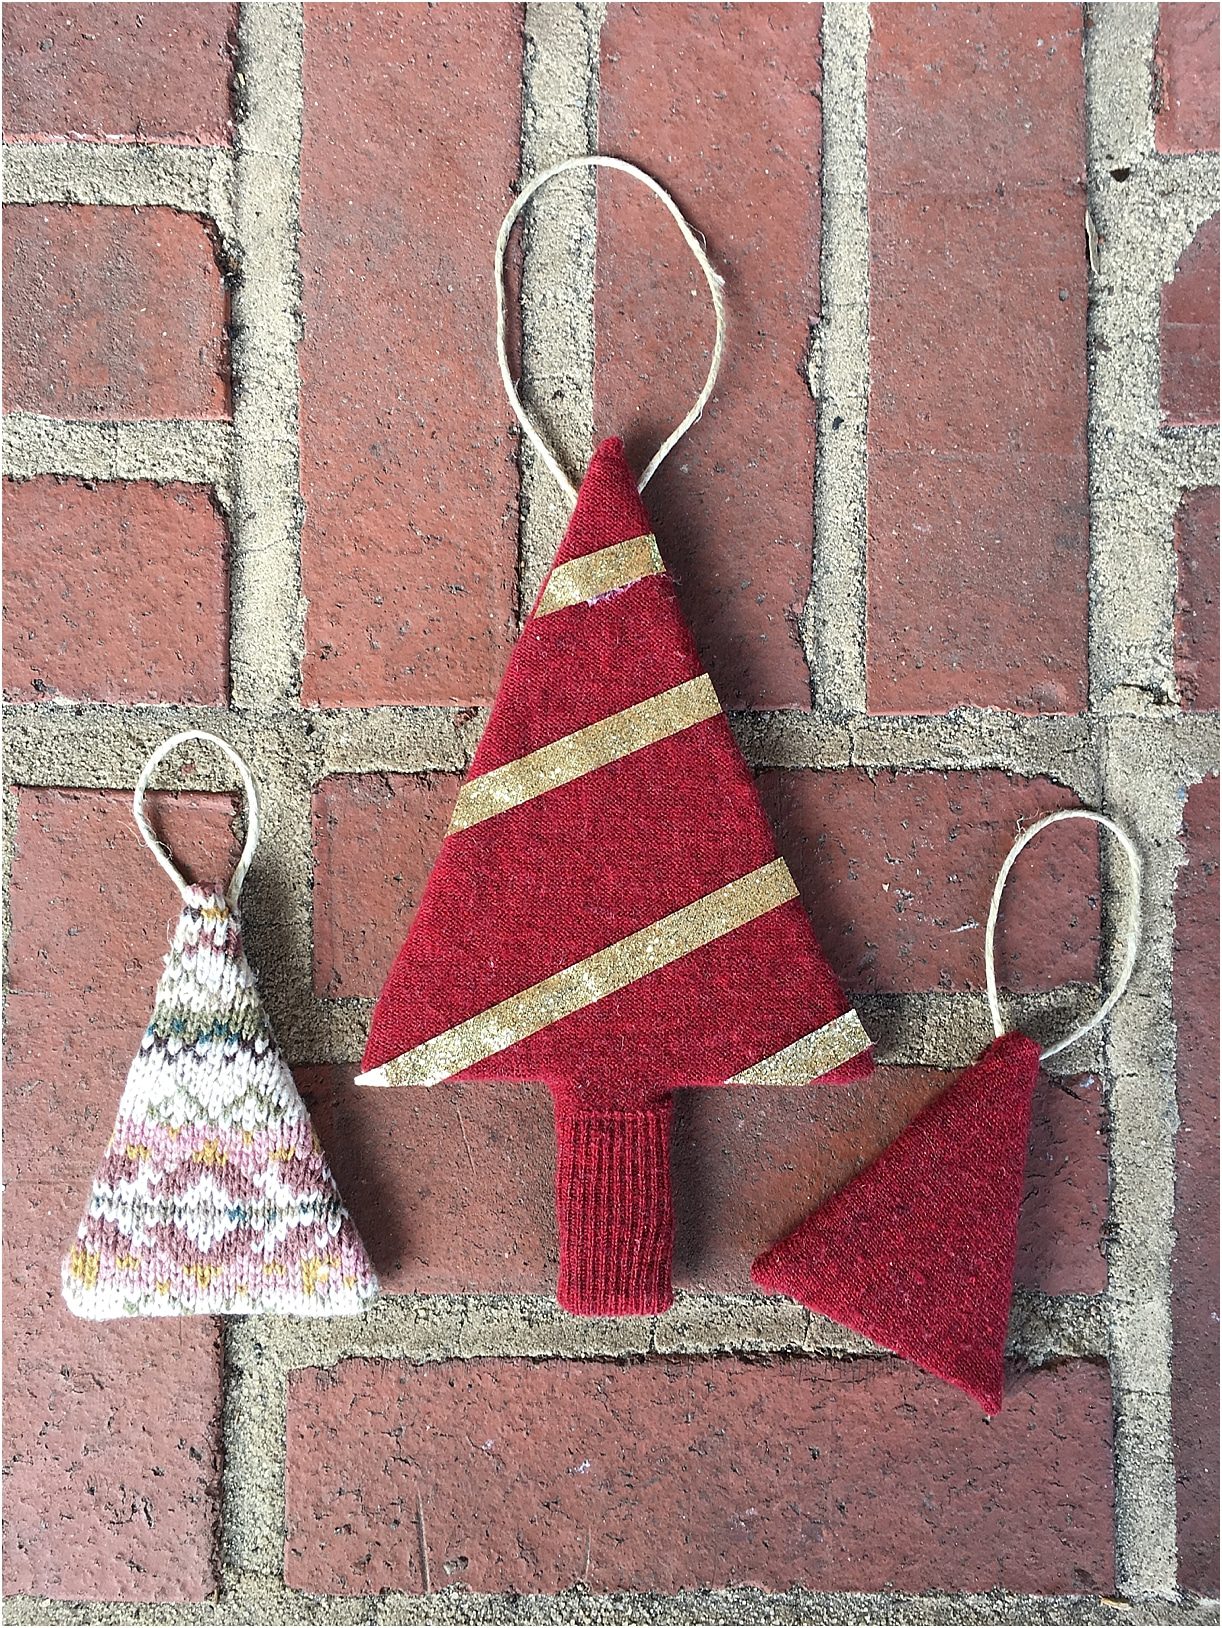 Upcycled Sweater DIY Projects as seen on Hill City Bride Virginia Wedding Blog - gift tags, hand made, handdmade, tag, ornament